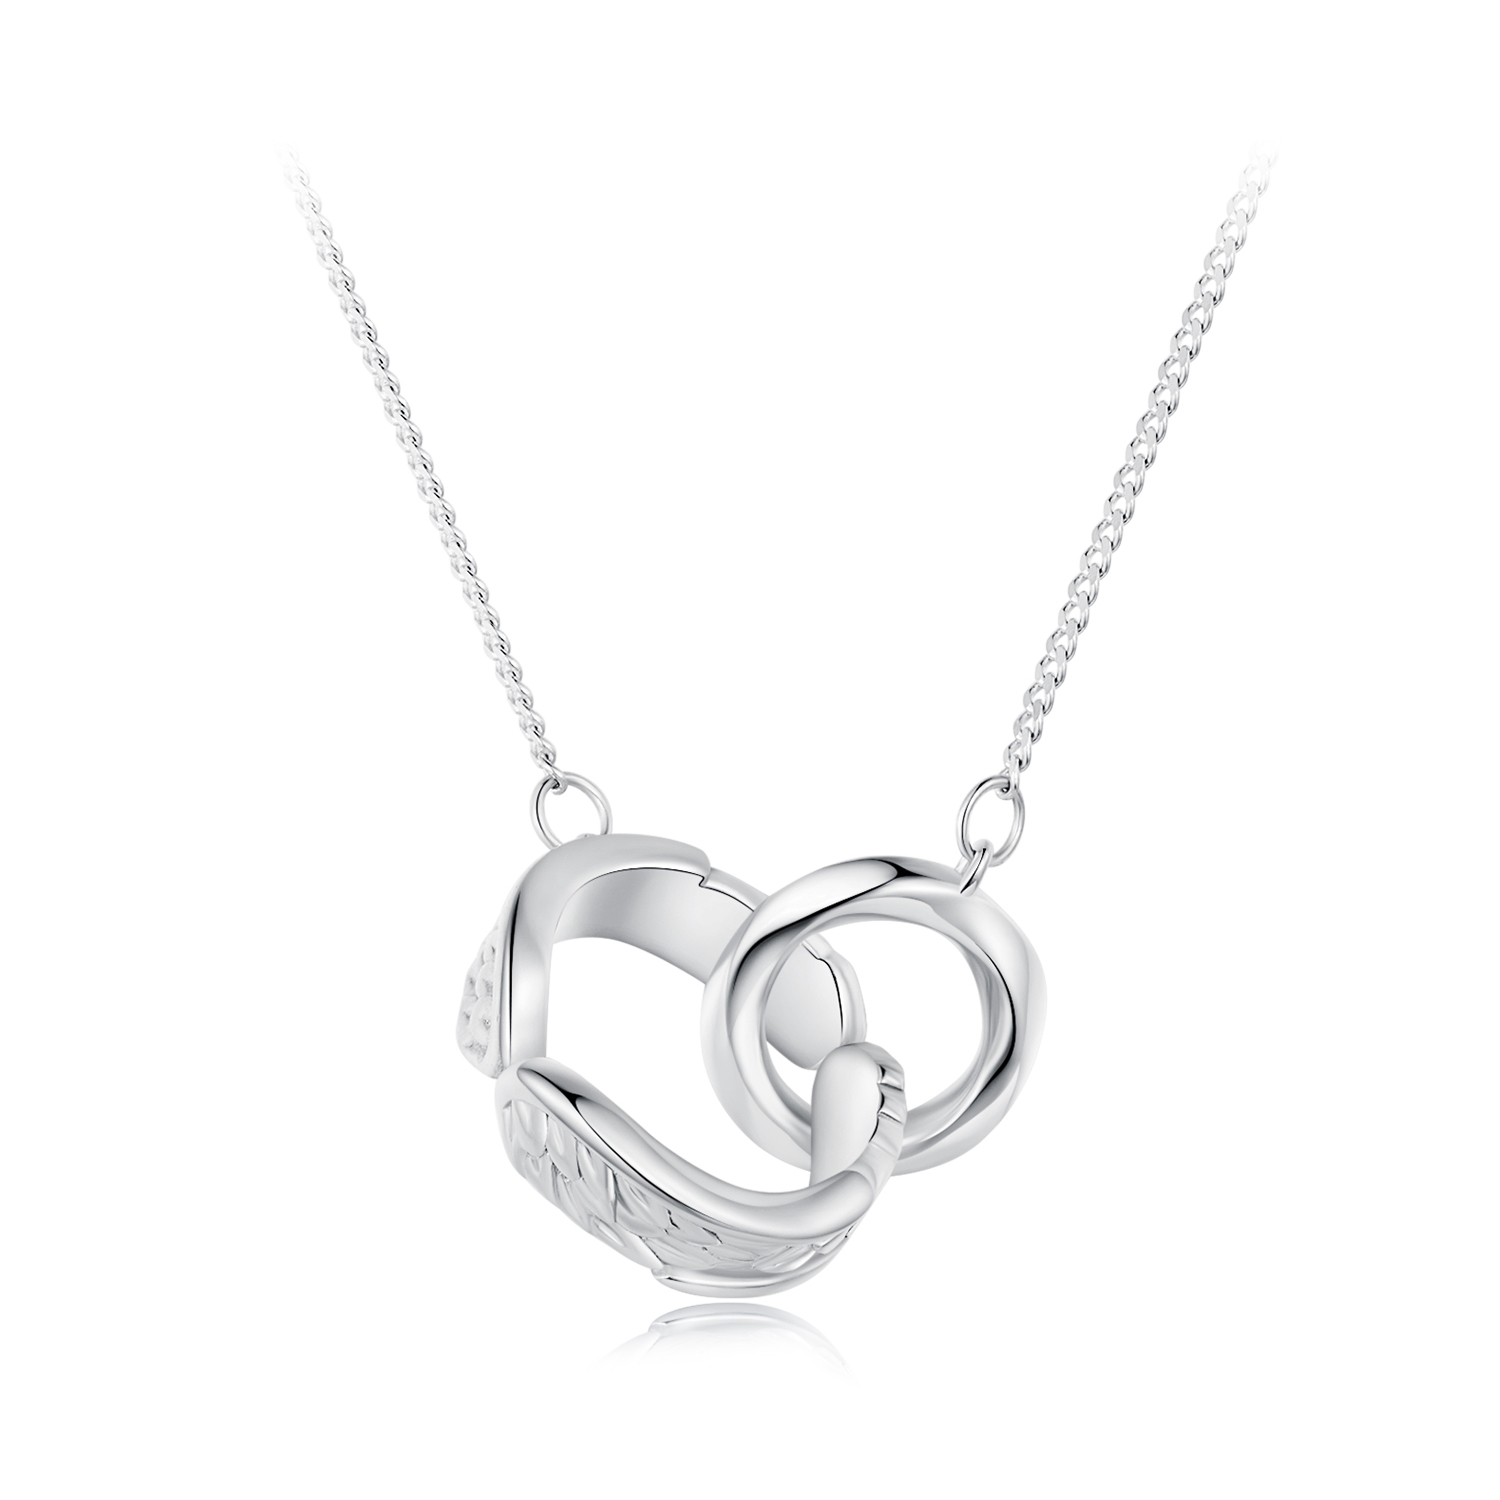 pandora style mobius double ring necklace bsn362